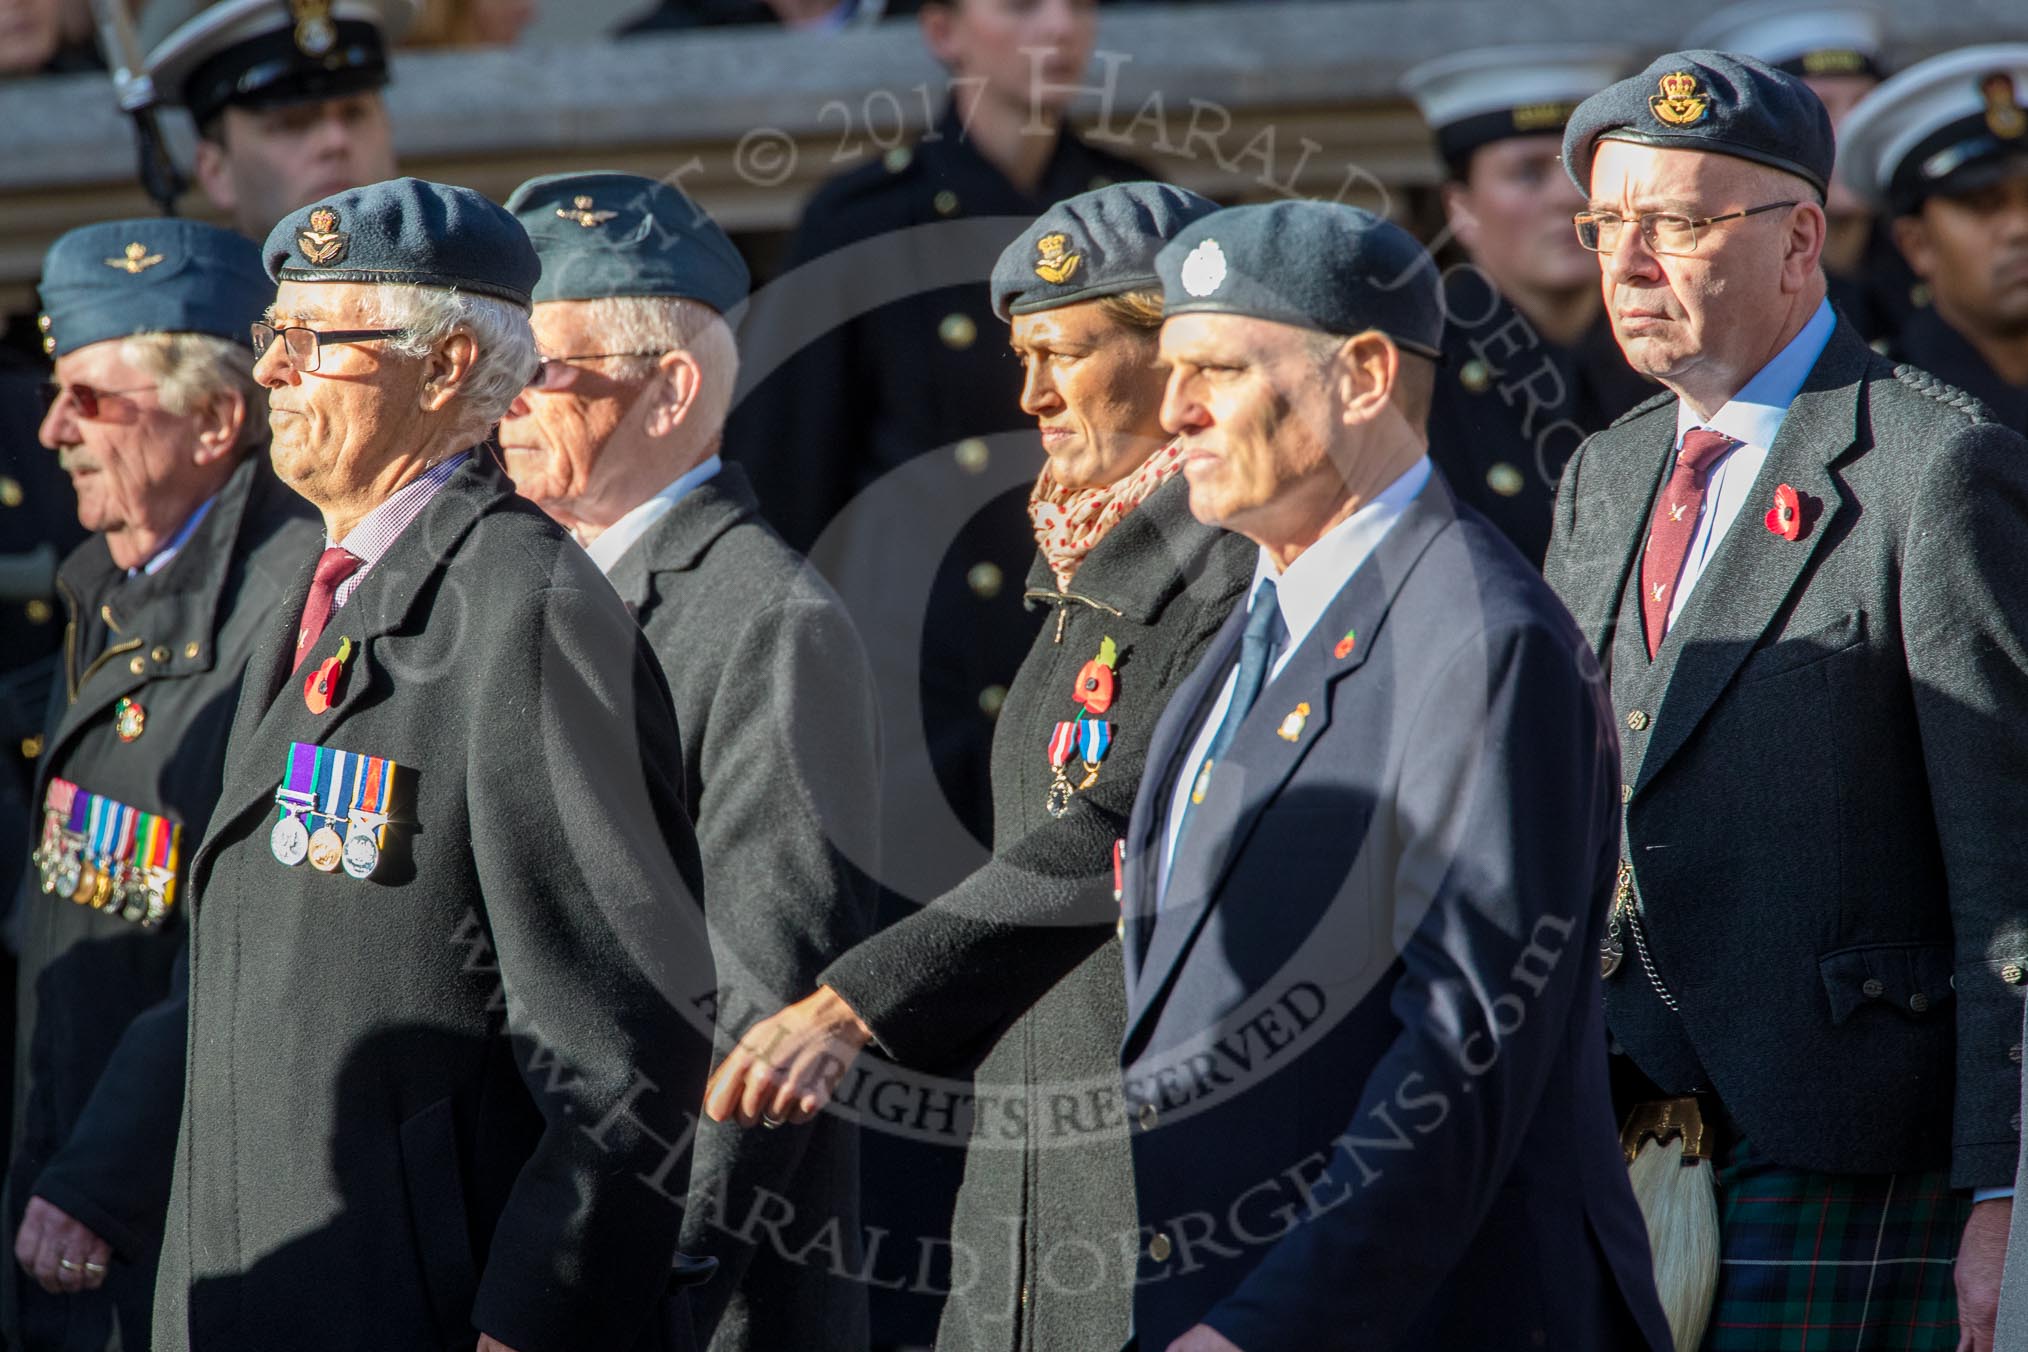 202 Squadron Association (Group C28, 16 members) during the Royal British Legion March Past on Remembrance Sunday at the Cenotaph, Whitehall, Westminster, London, 11 November 2018, 12:19.